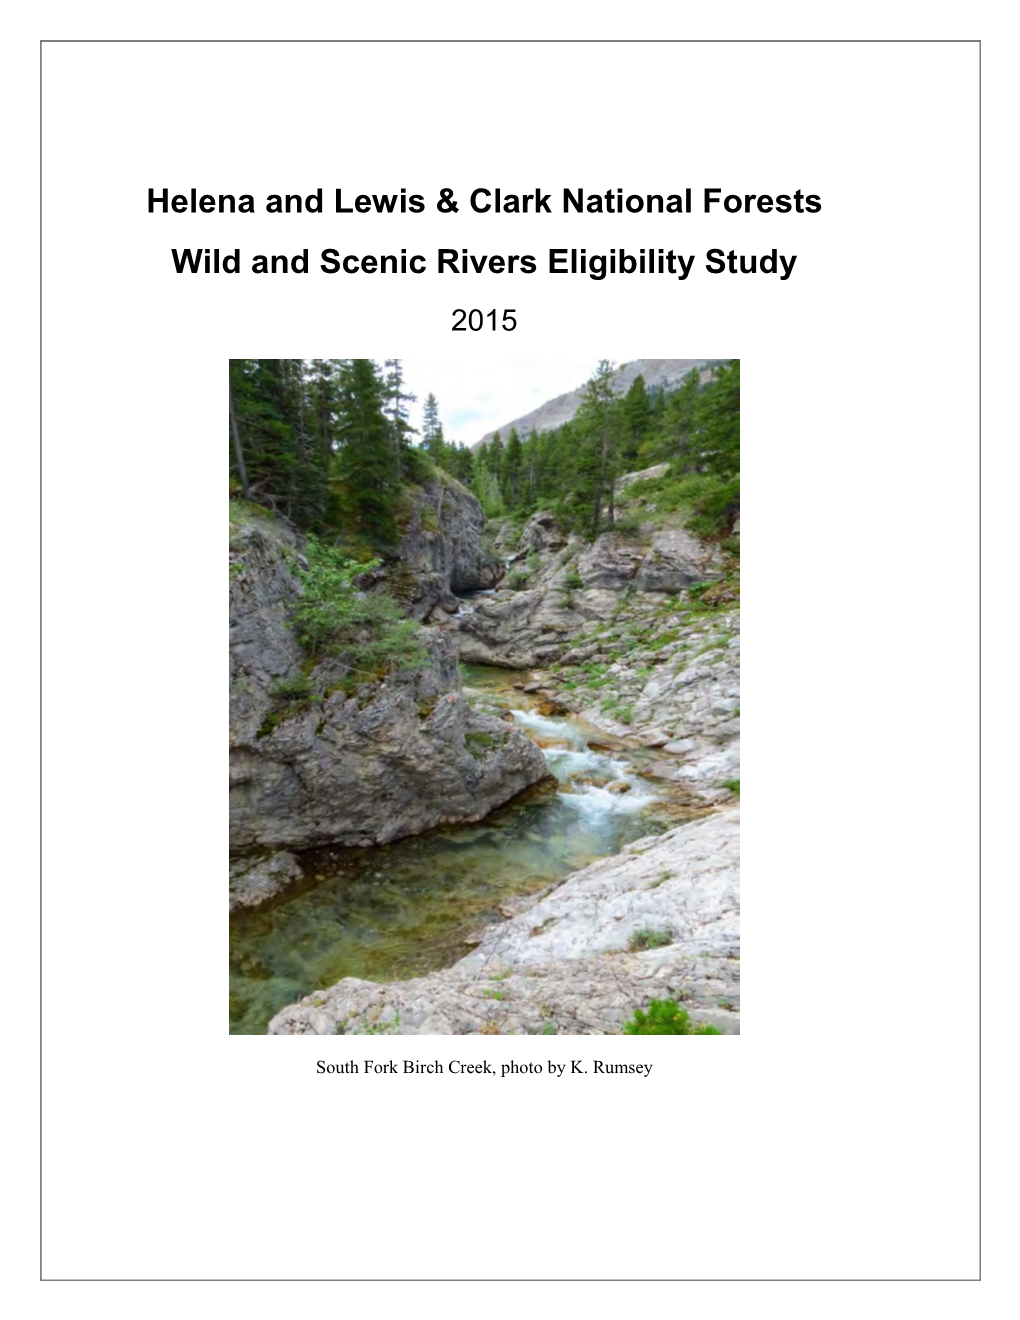 Helena and Lewis & Clark National Forests Wild and Scenic Rivers